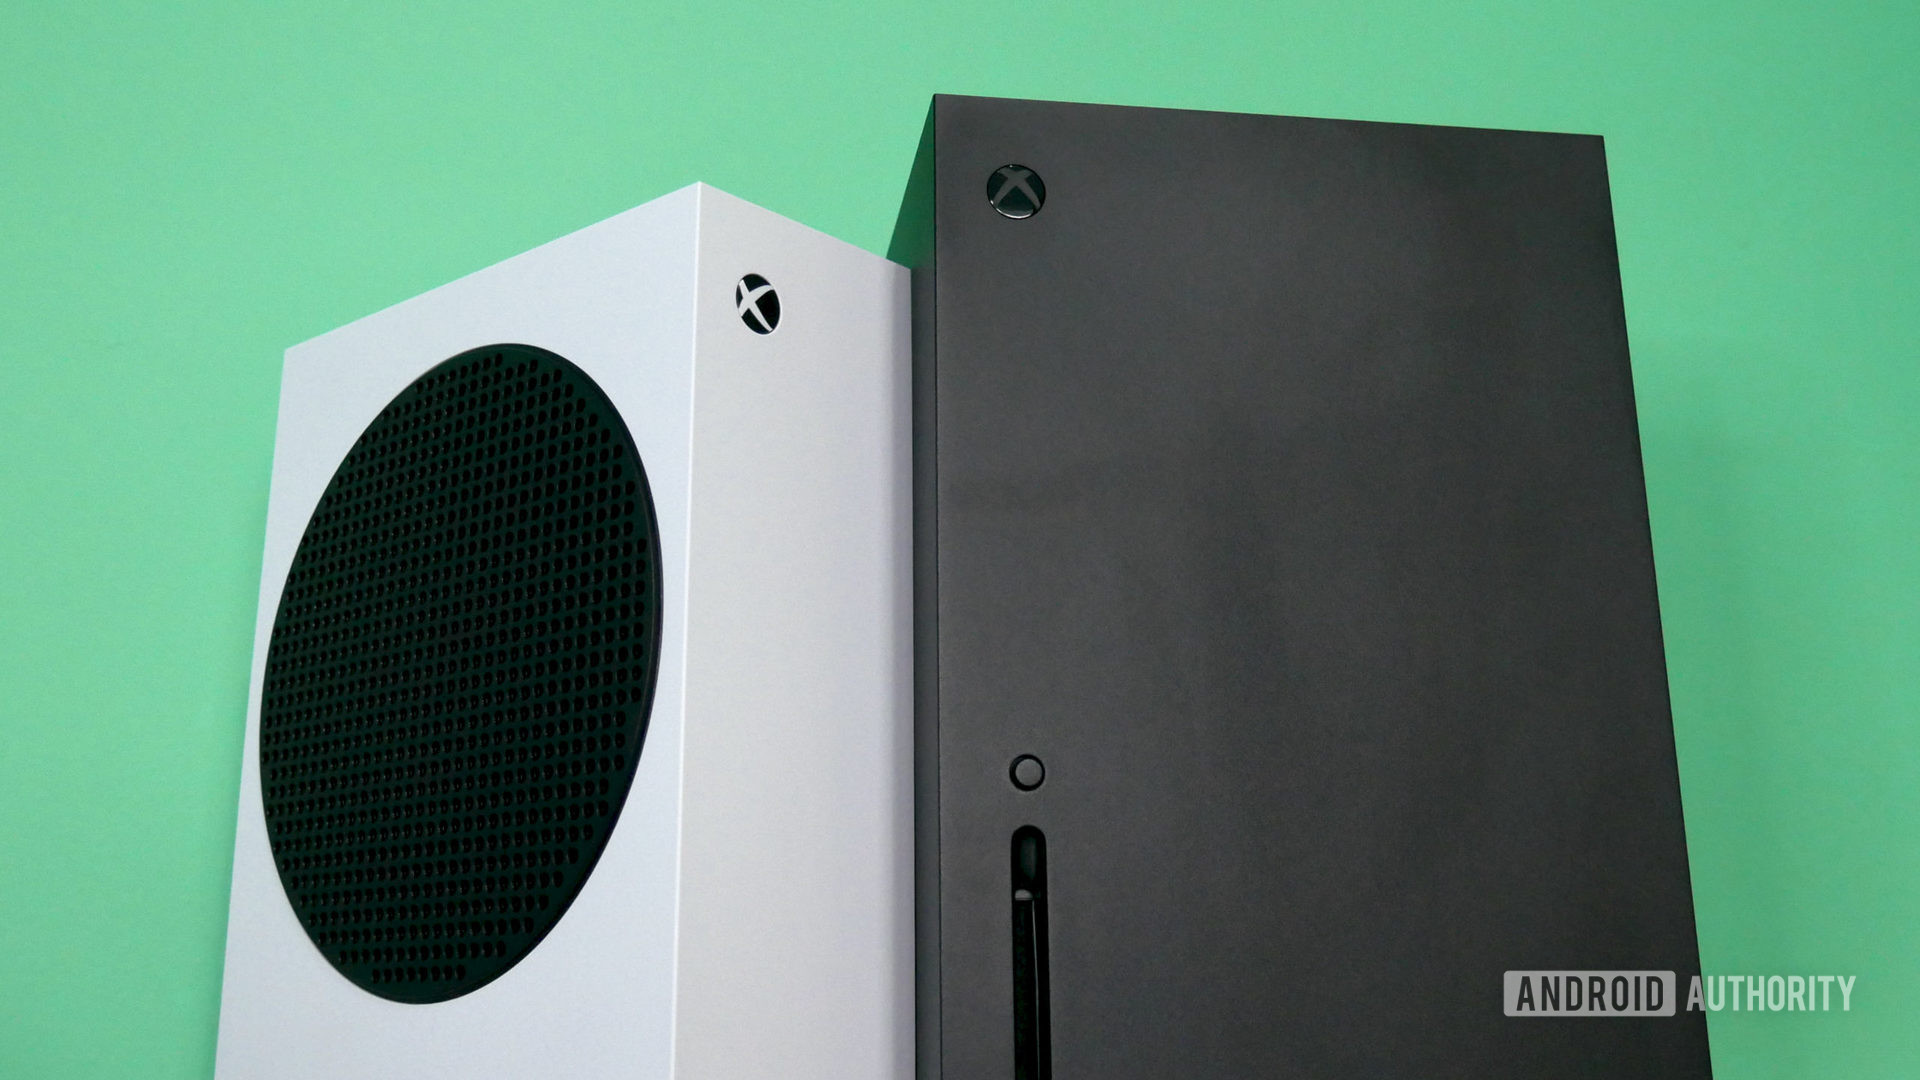 PS5 vs Xbox Series X: How the next-gen consoles stack up